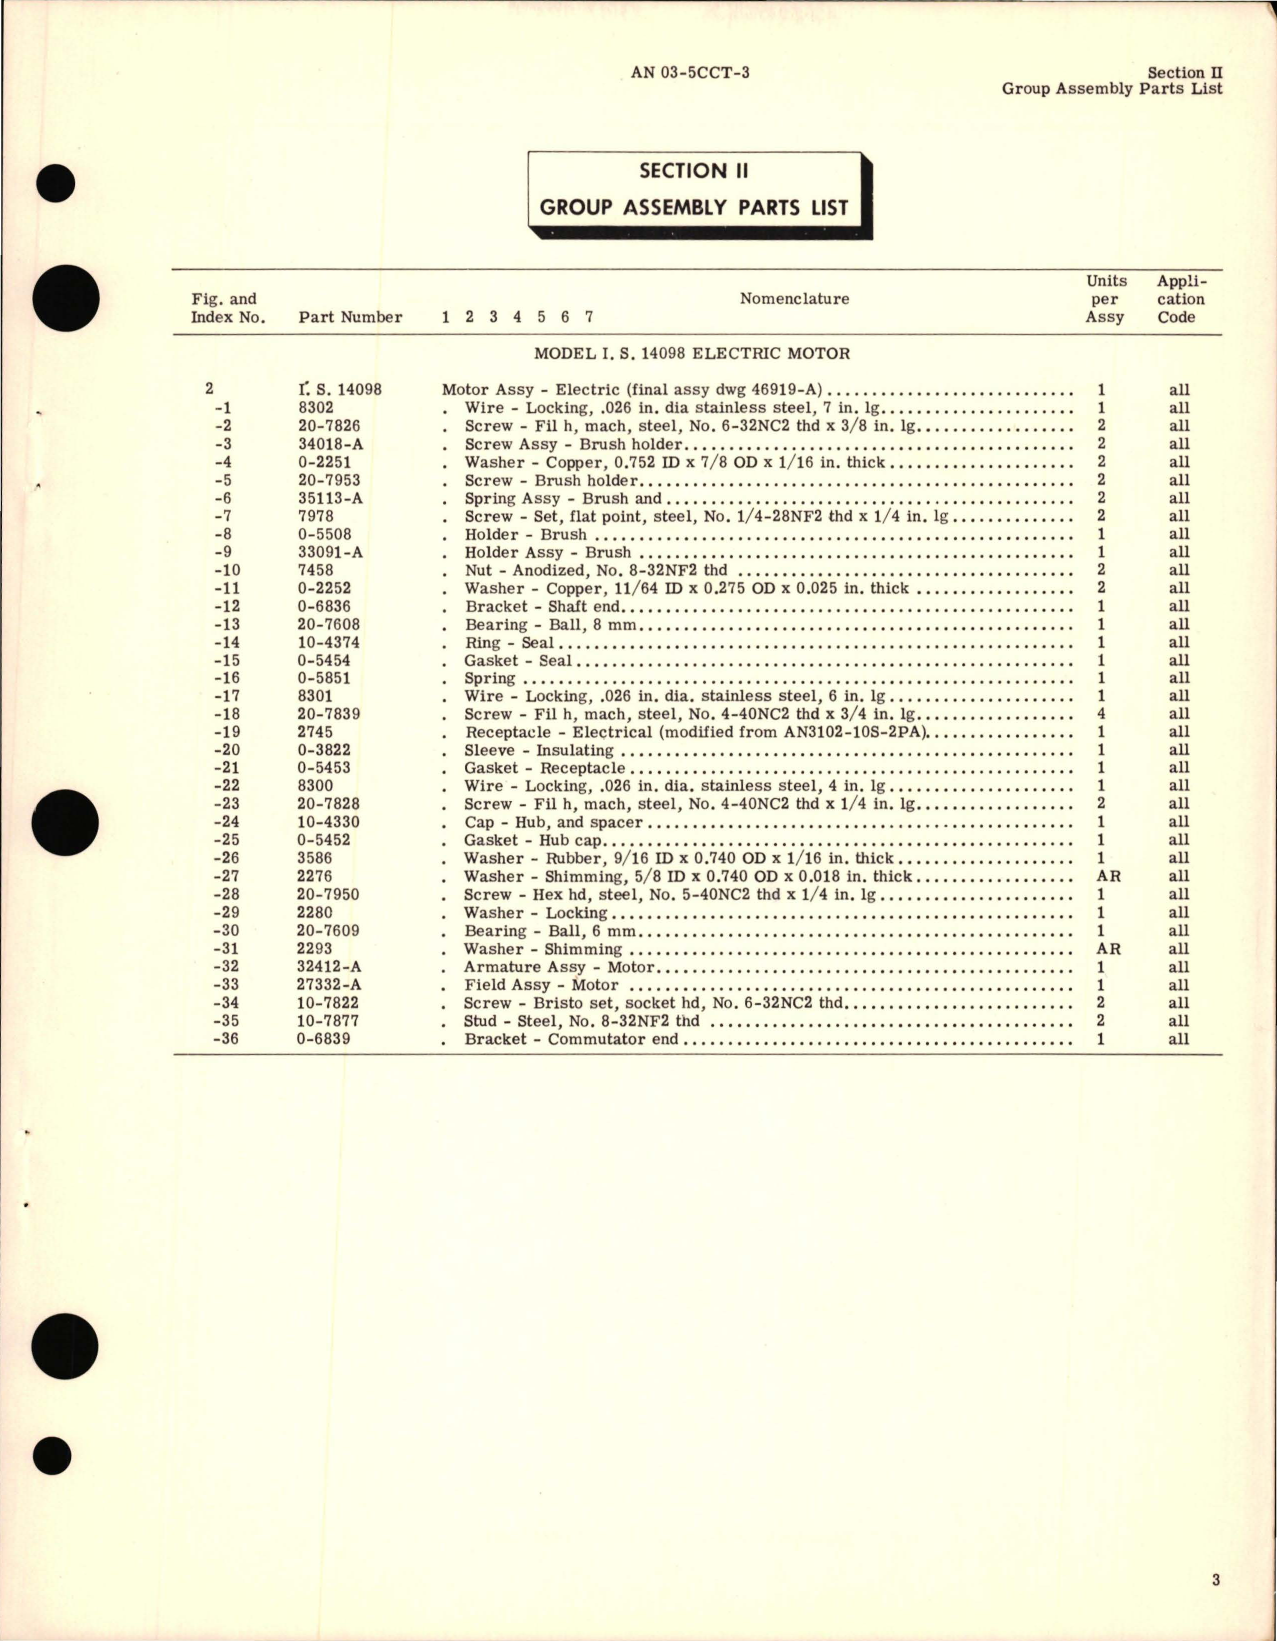 Sample page 5 from AirCorps Library document: Parts Catalog for Electric Motors Model I.S. 14098 